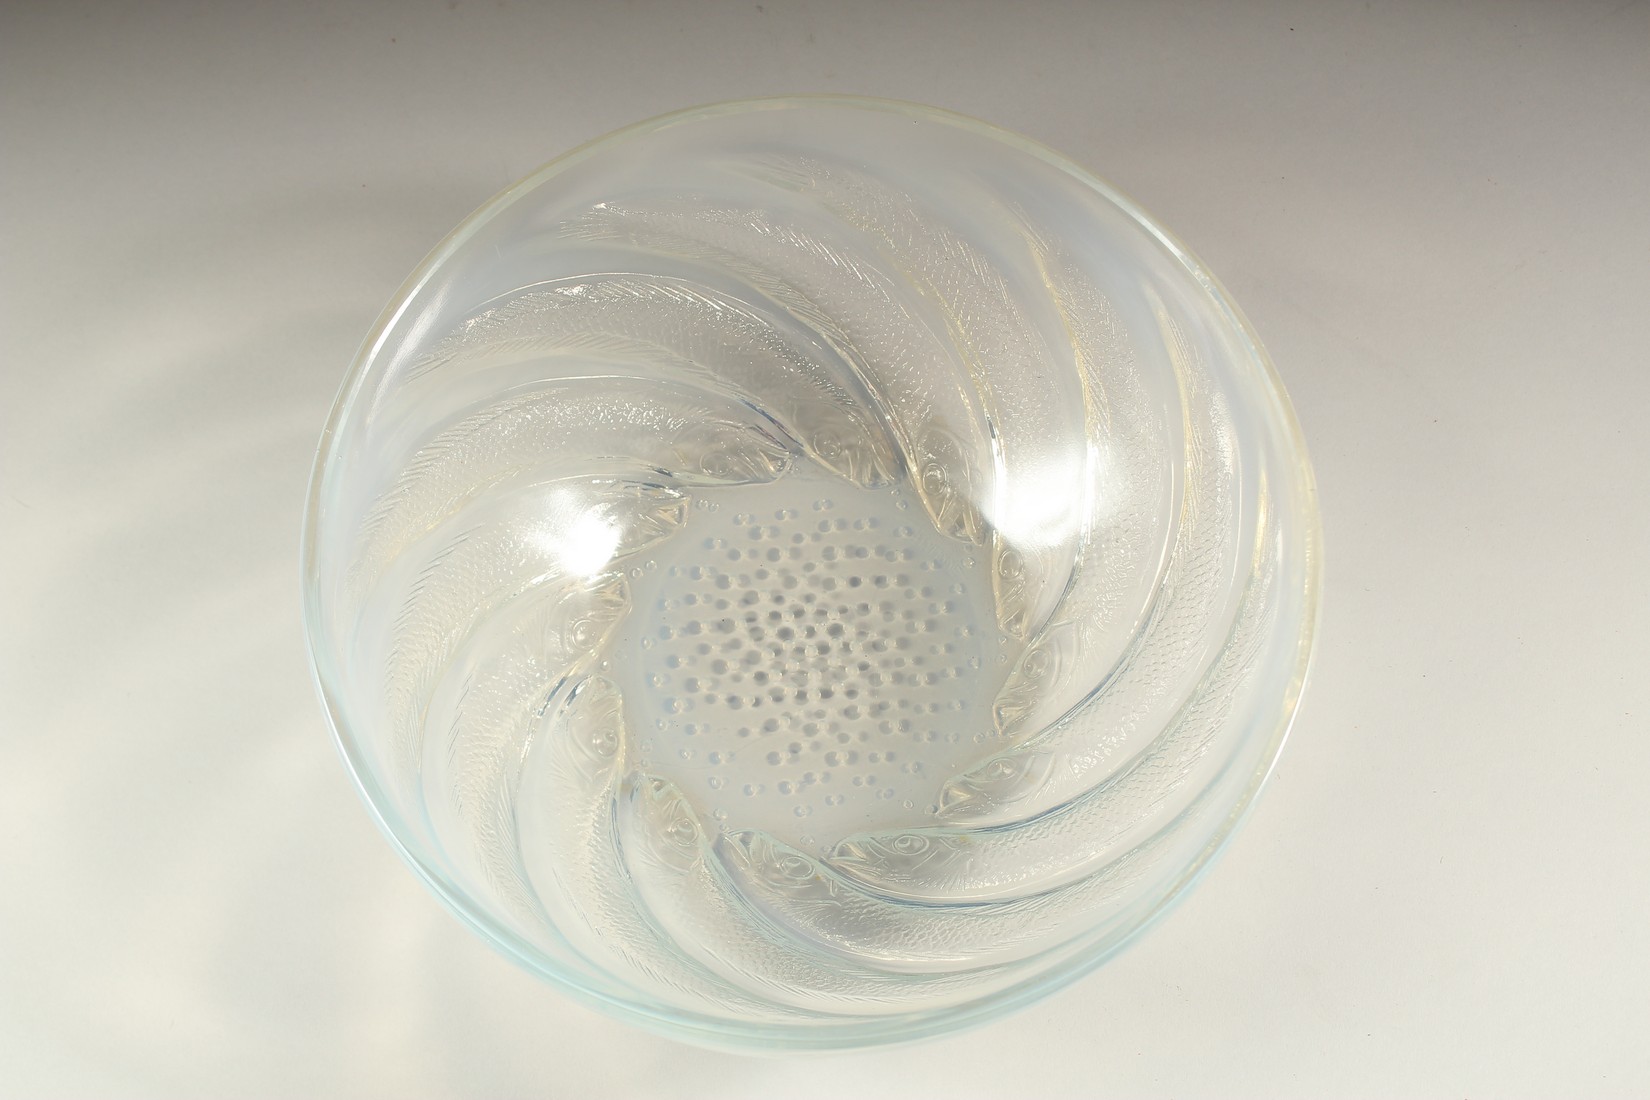 A LALIQUE CIRCULAR BOWL with spiral of fishes. 9.5cms diameter. Etched: R. Lalique, France. - Image 2 of 4